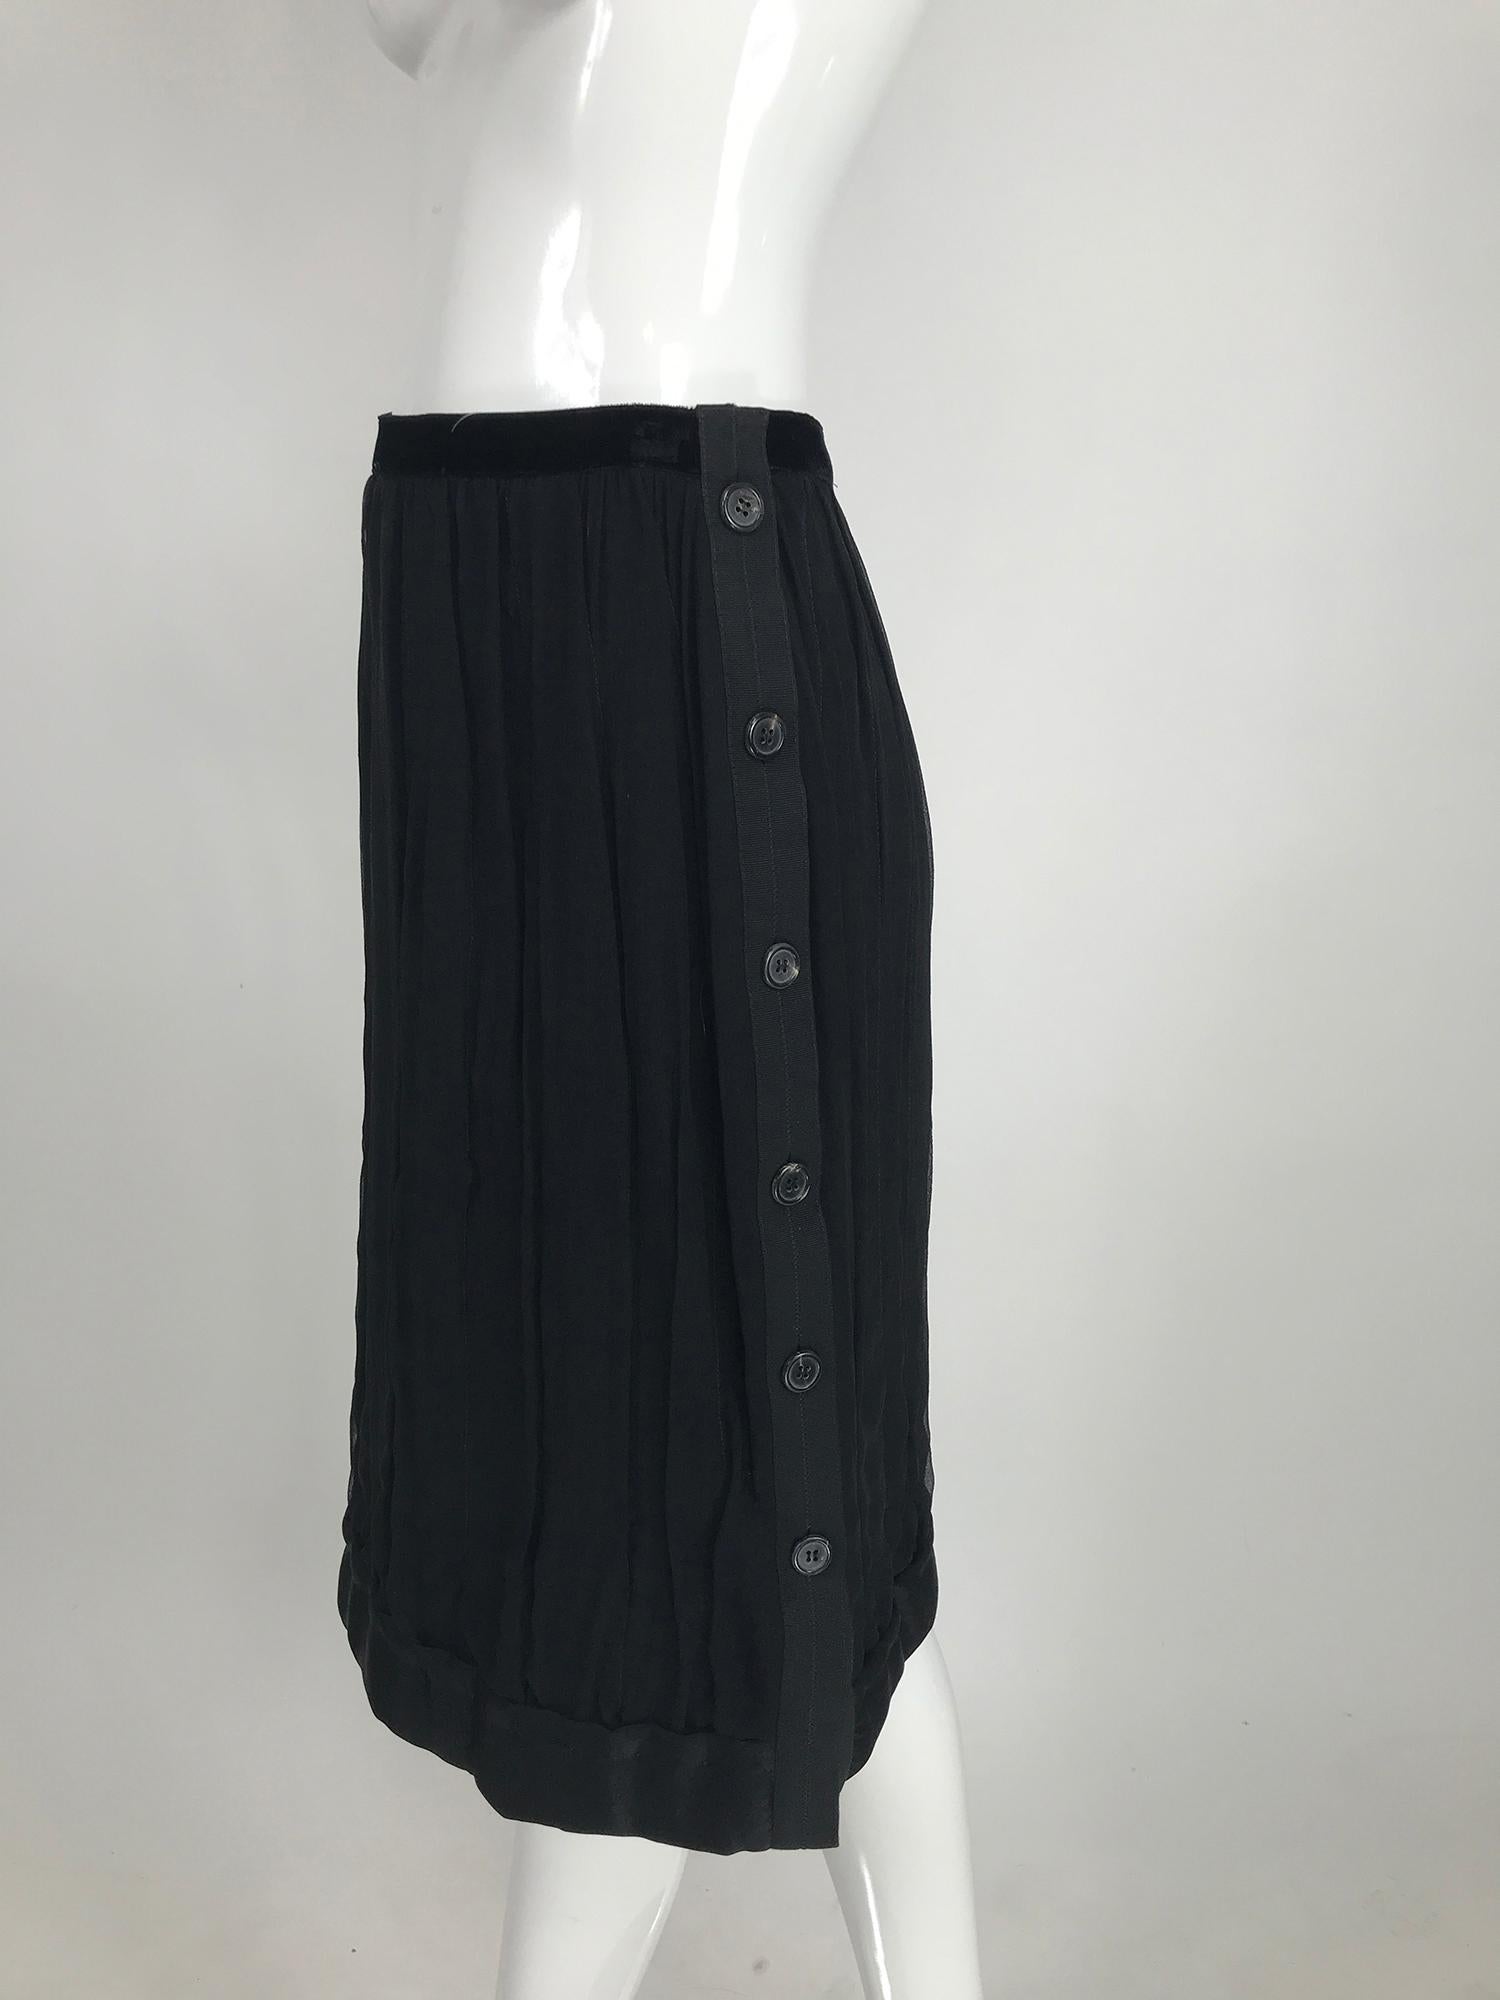 Lanvin black silk chiffon skirt has a velvet waist band and padded silk satin hem band, the chiffon of the skirt is draped vertically over a silk knit lining. This unique skirt closes at the side with buttons from the waist to the hem. Fully lined.